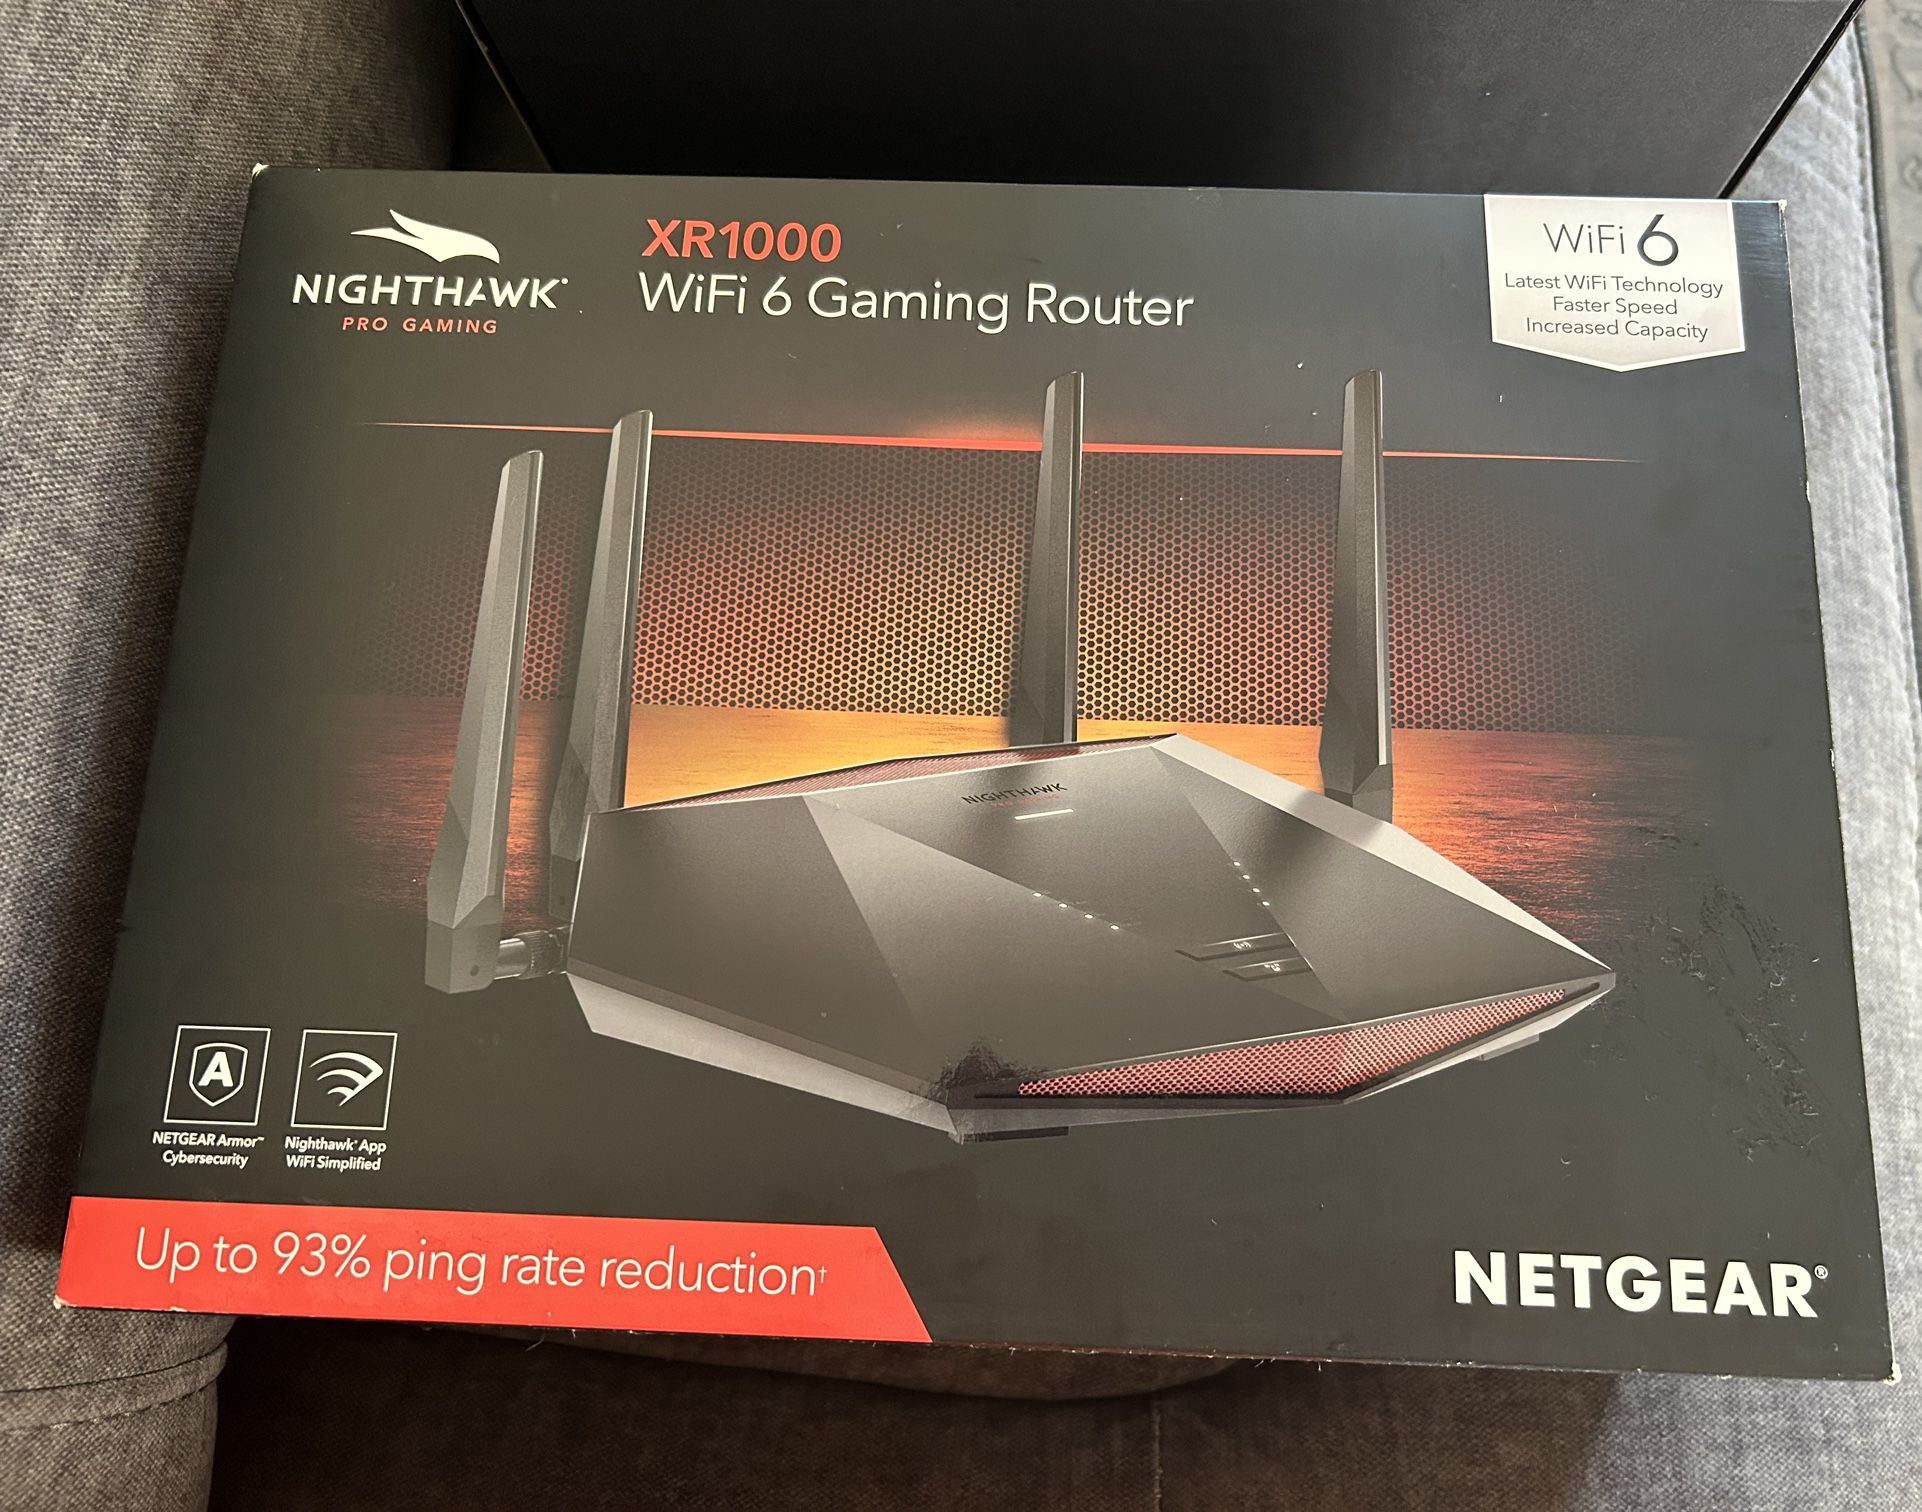 Xr1000 Gaming router